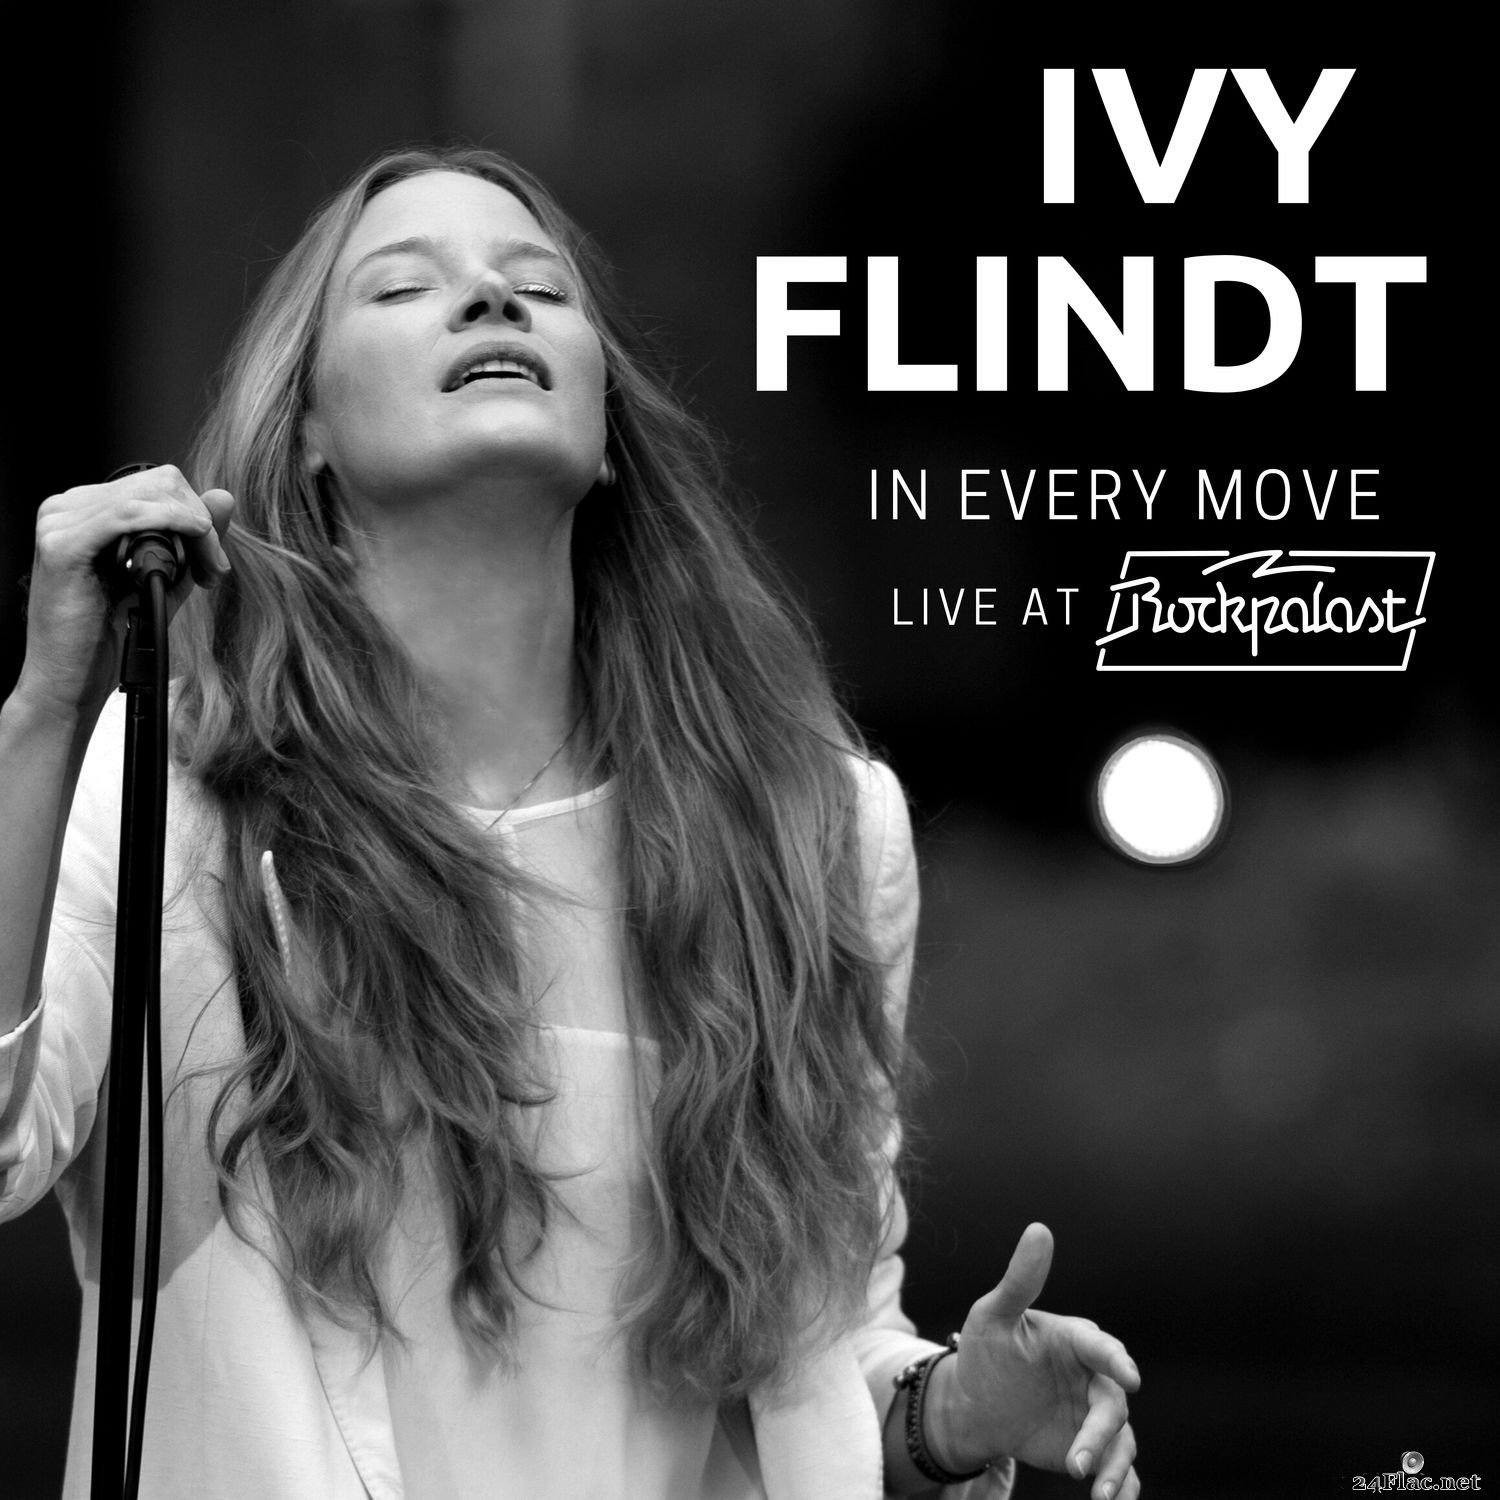 Ivy Flindt - In Every Move - Live at Rockpalast (2021) Hi-Res